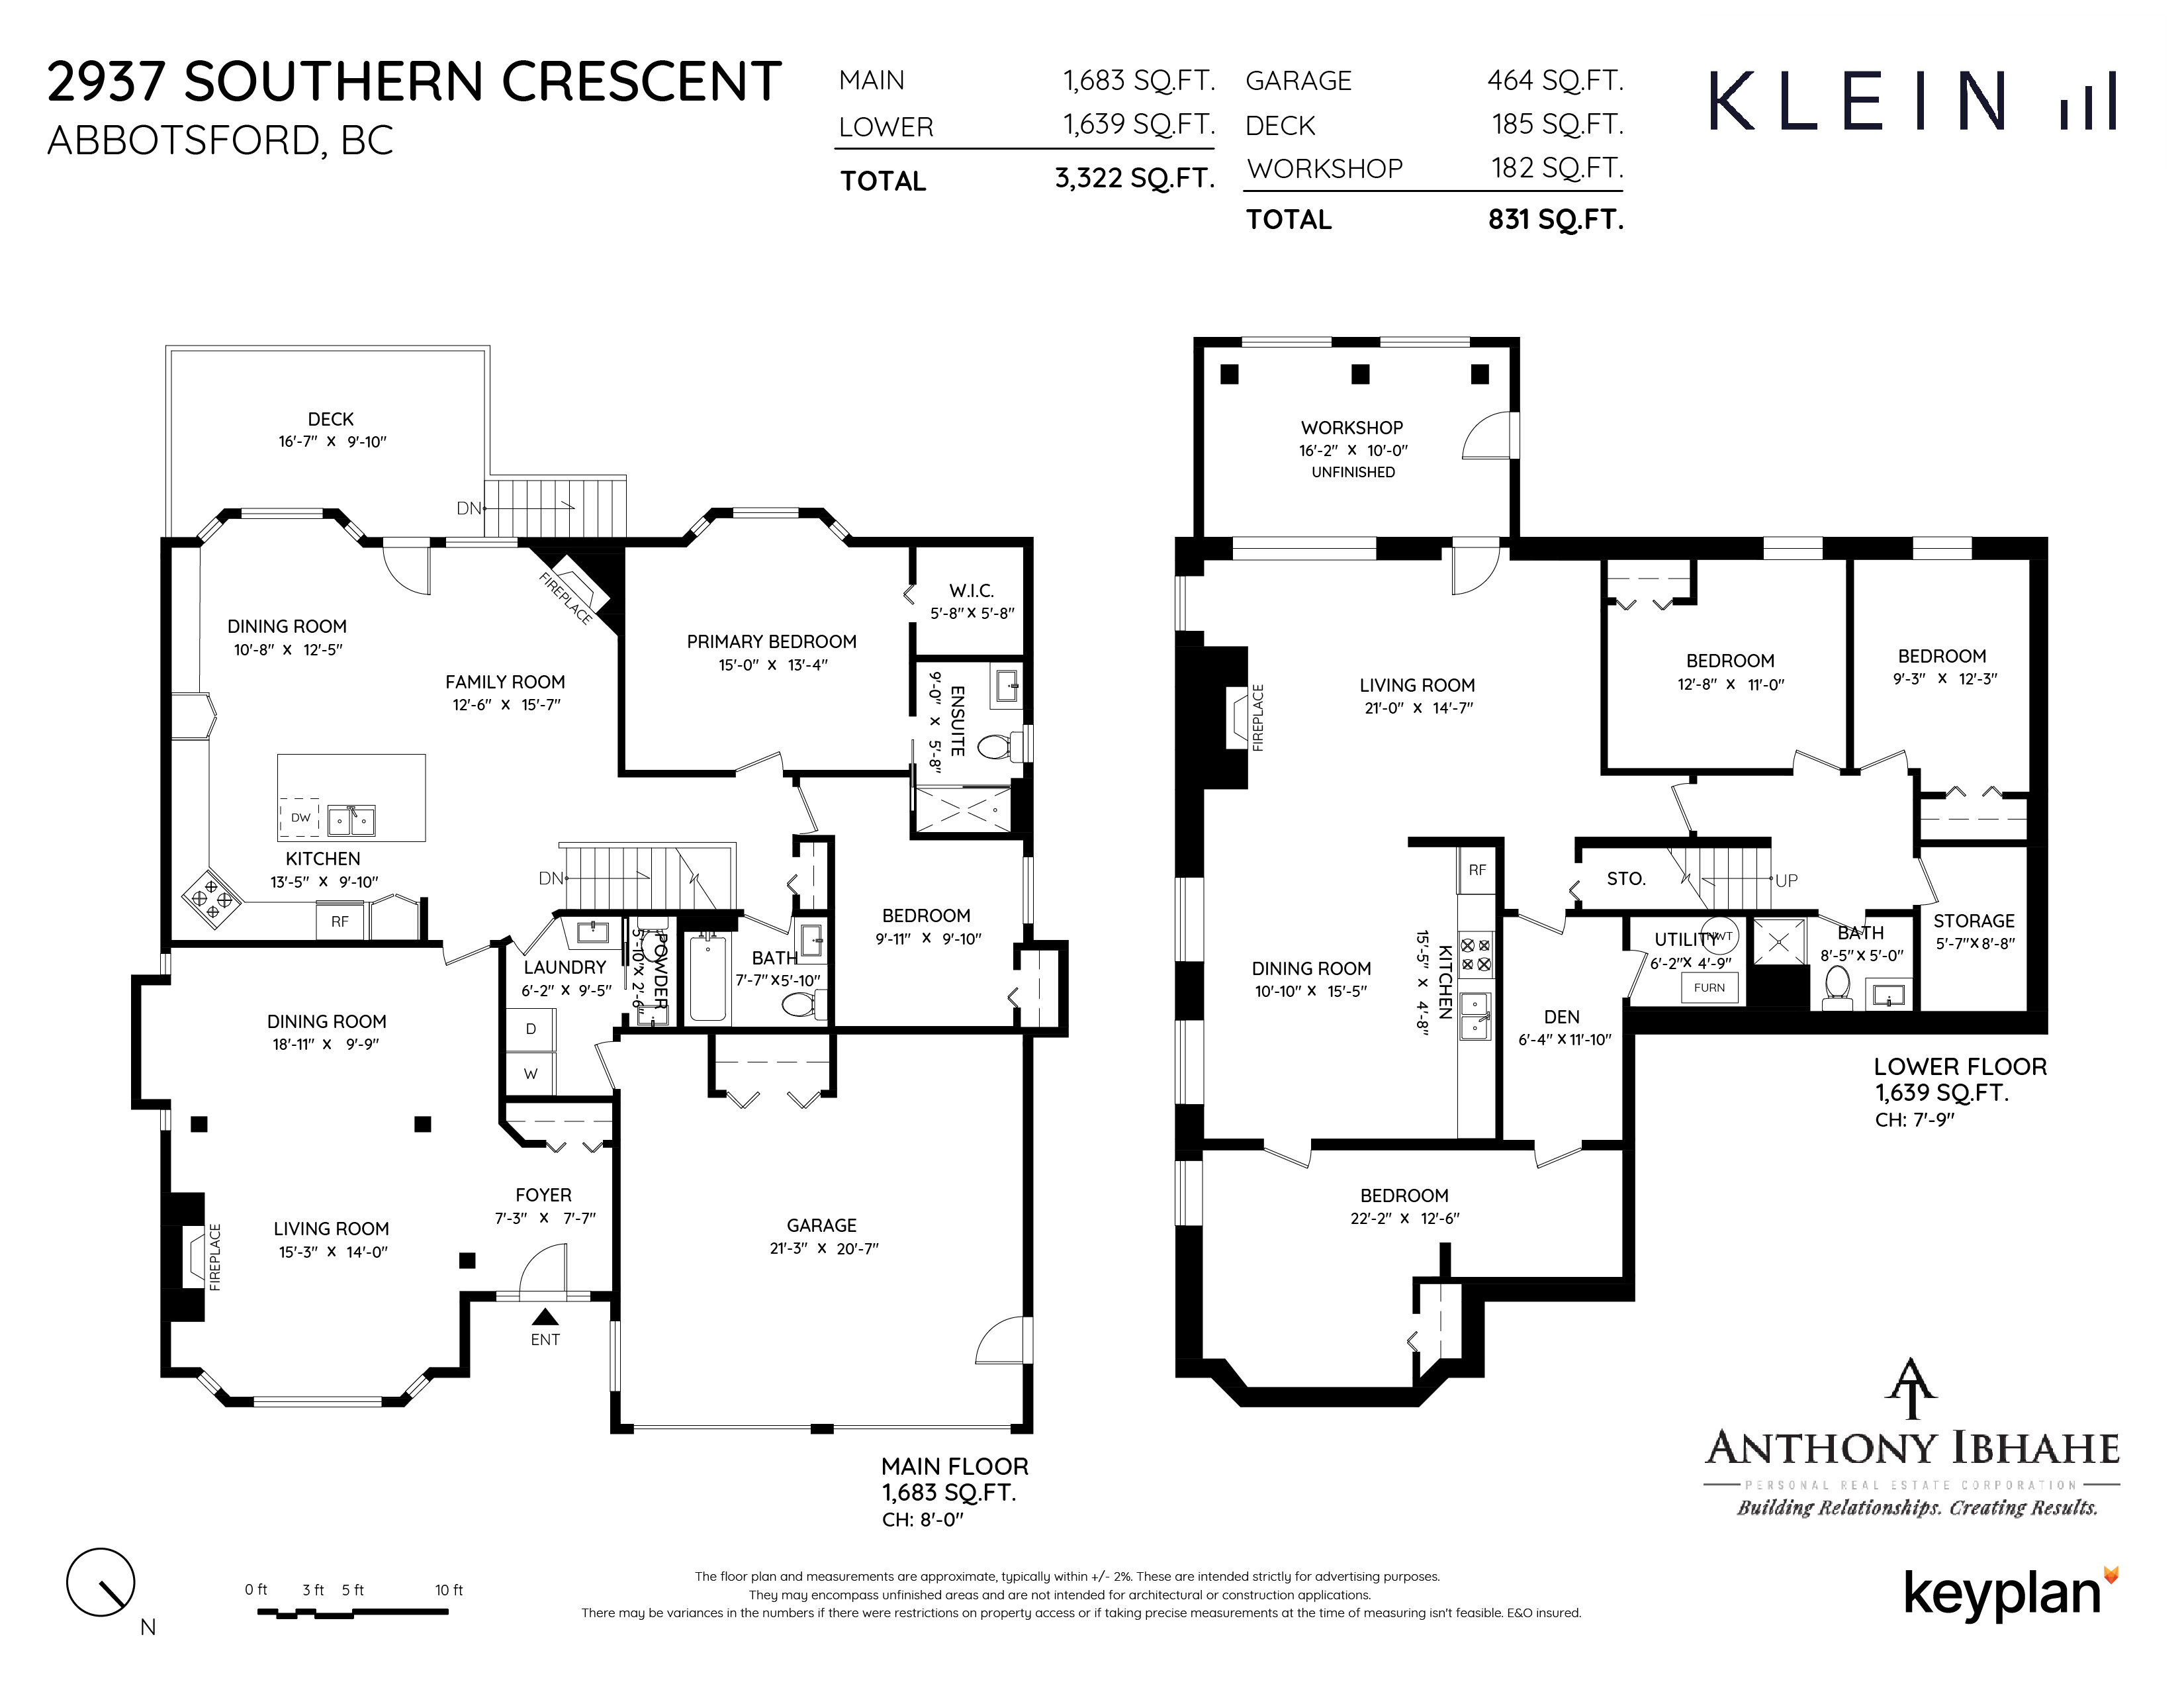 Anthony Ibhahe - 2937 Southern Crescent, Abbotsford, BC, Canada | Floor Plan 1